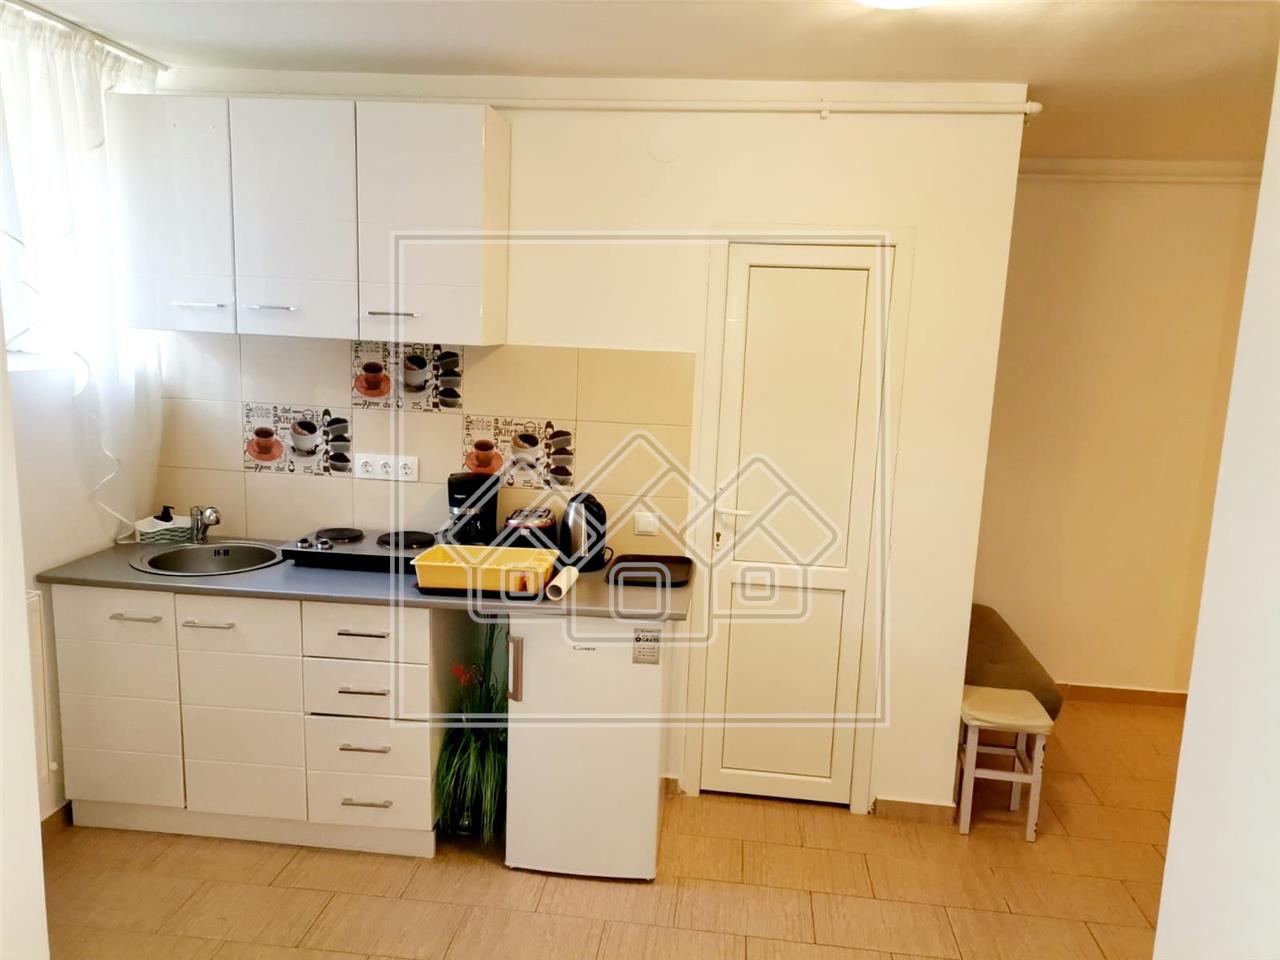 Studio for rent in Sibiu - 1 room - 60 usable sqm - Central Area